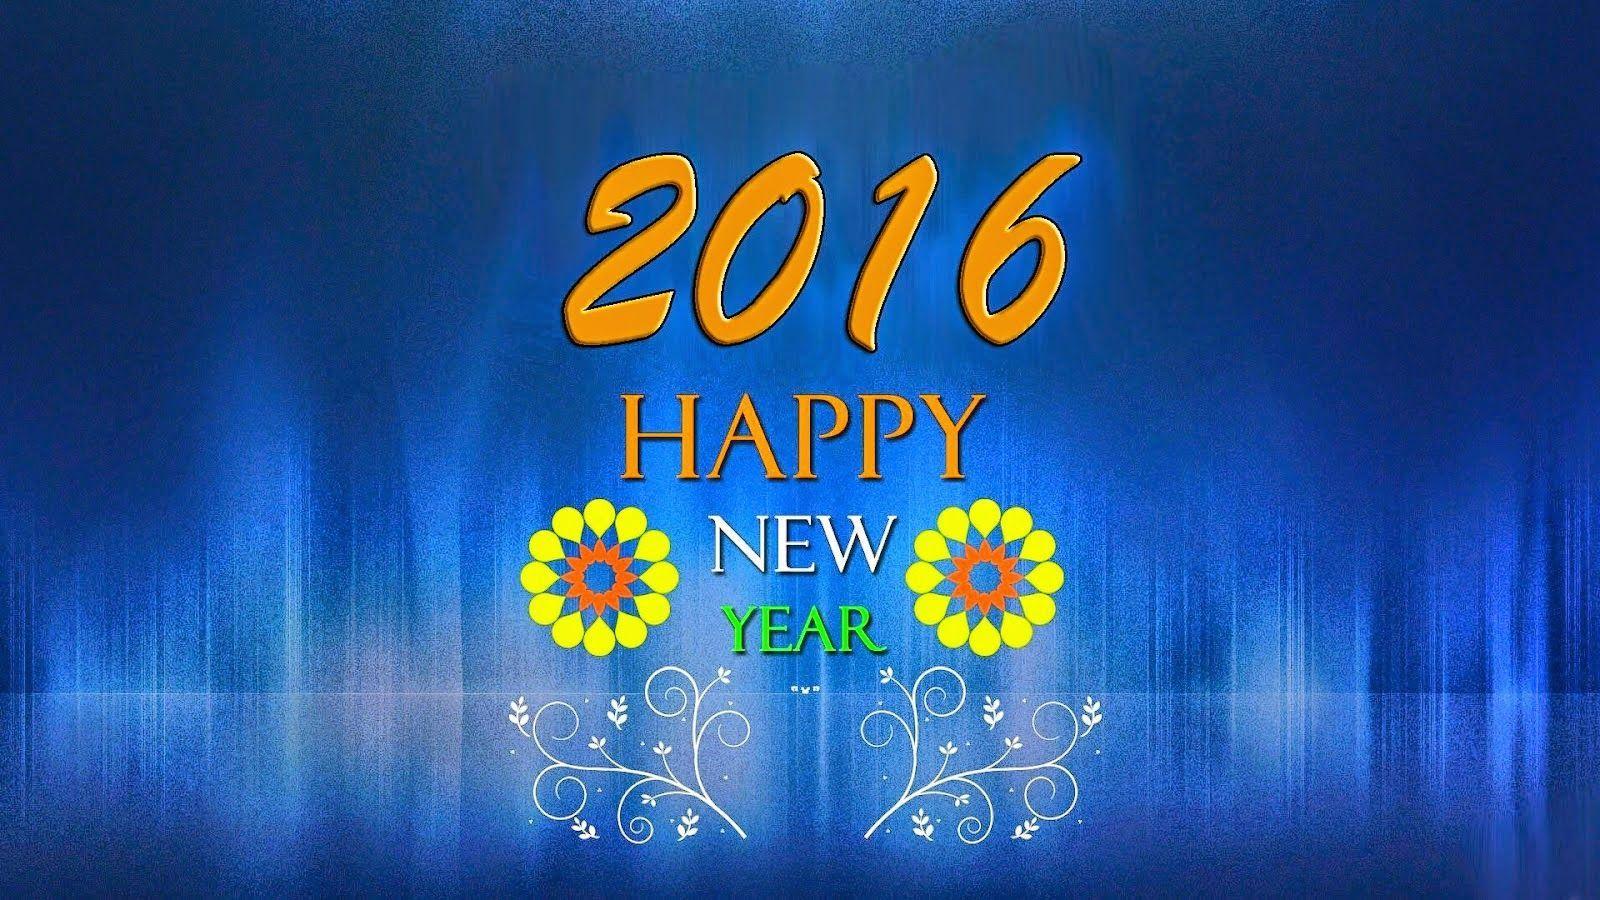 Happy New Year 2016 HD Image Free Download. Happy New Year 2016